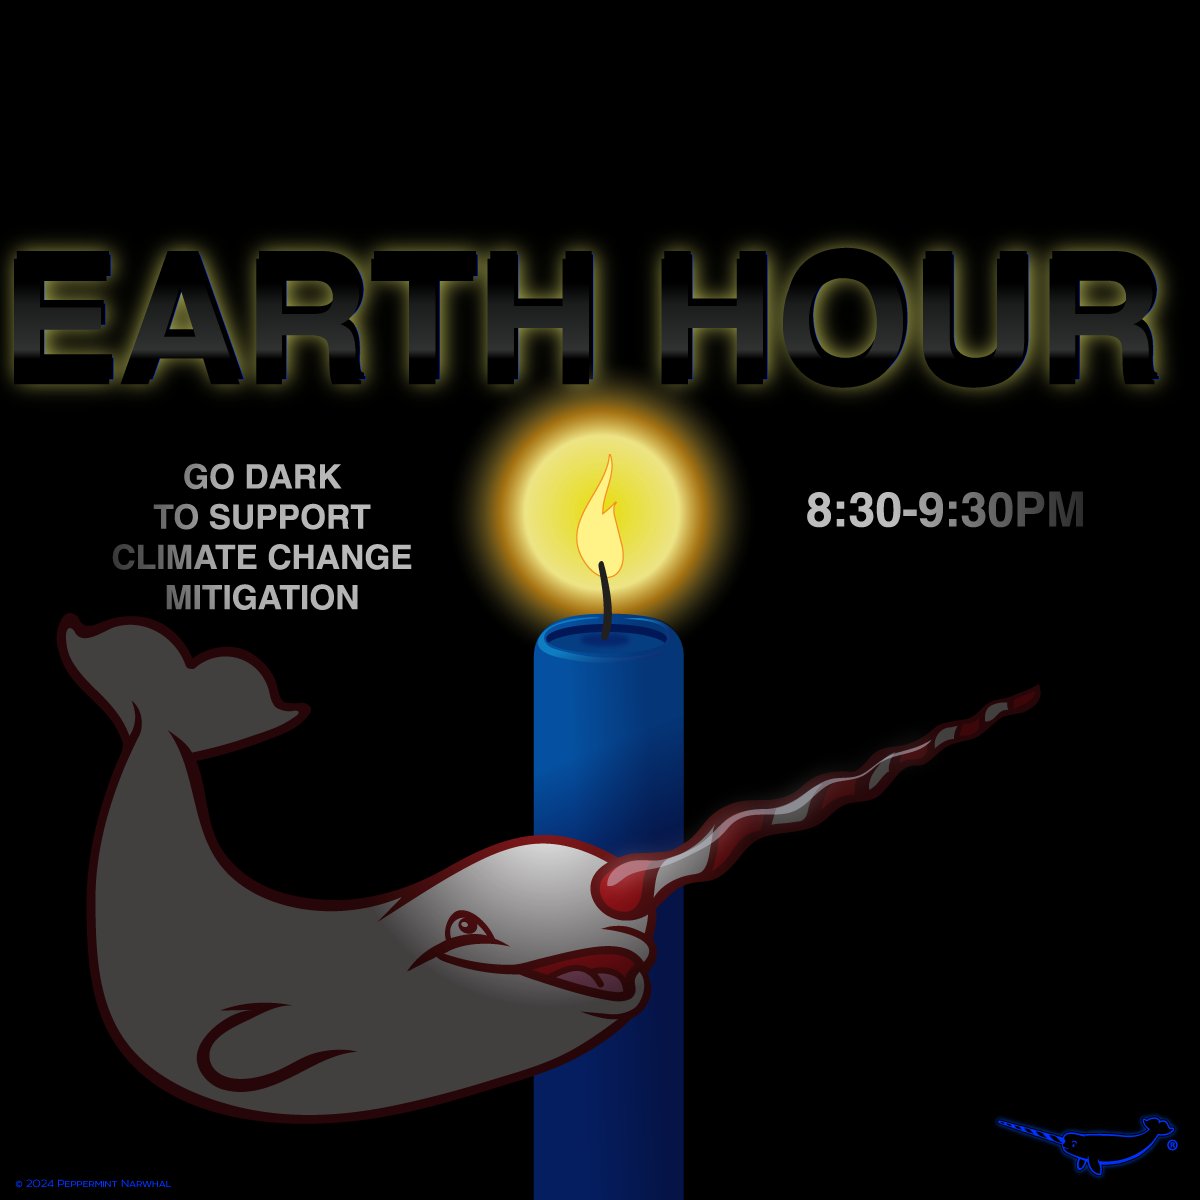 Today is #EarthHour Day! Go Dark and Unplug All Devices to Support Climate Change Mitigation from 8:30-9:30pm - Today (March 30) Shop #PeppermintNarwhal: peppermintnarwhal.com #EarthHour2024